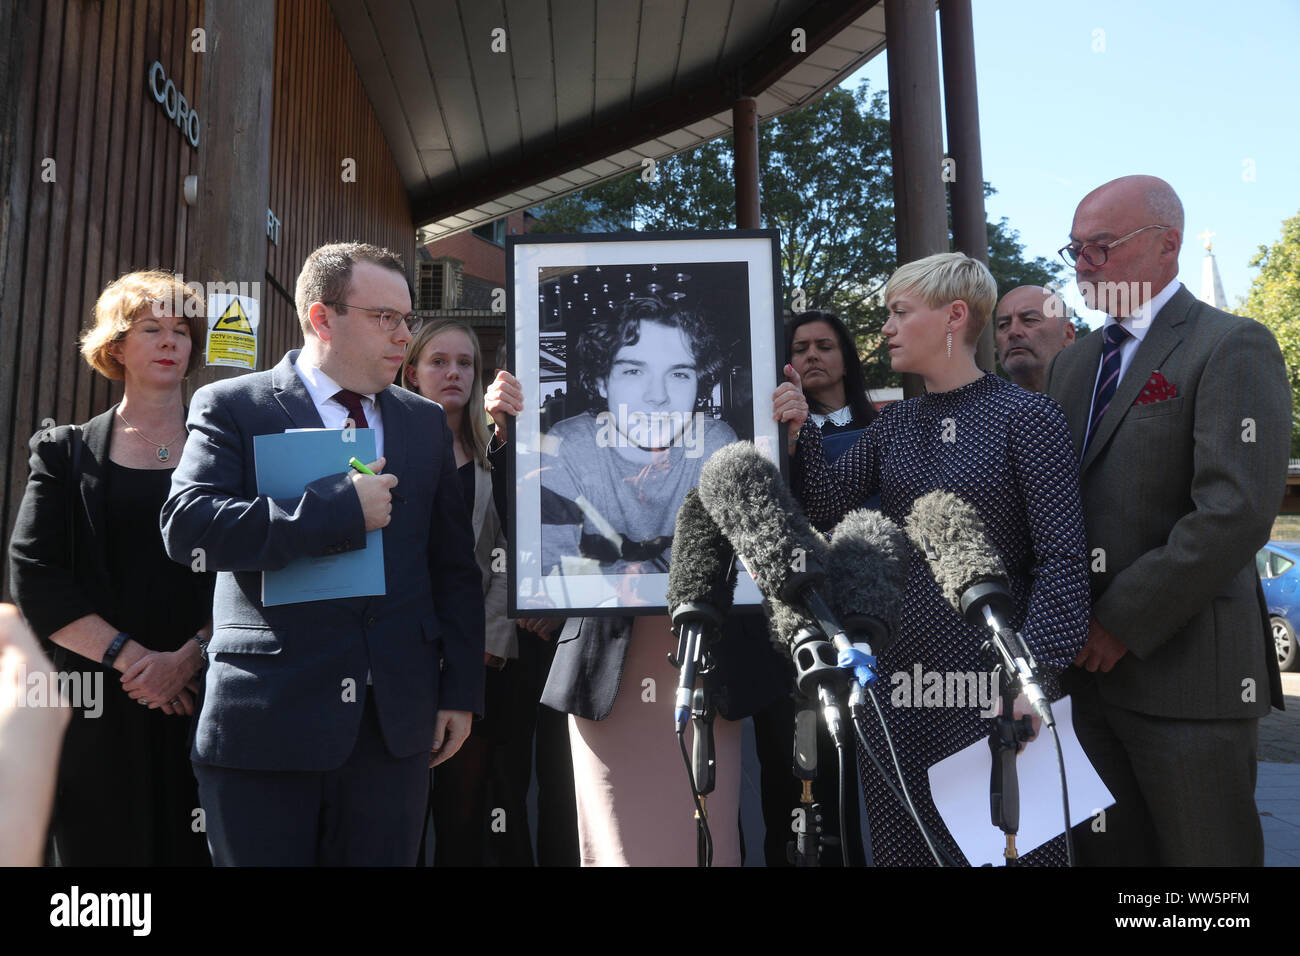 RETRANSMITTING CORRECTING SPELLING OF NAME TO OWEN CAREY The family of Owen  Carey, mother Moira (hidden), sister Emma Kocher (second right) and father  Paul Carey (right), outside Southwark Coroner's Court following the